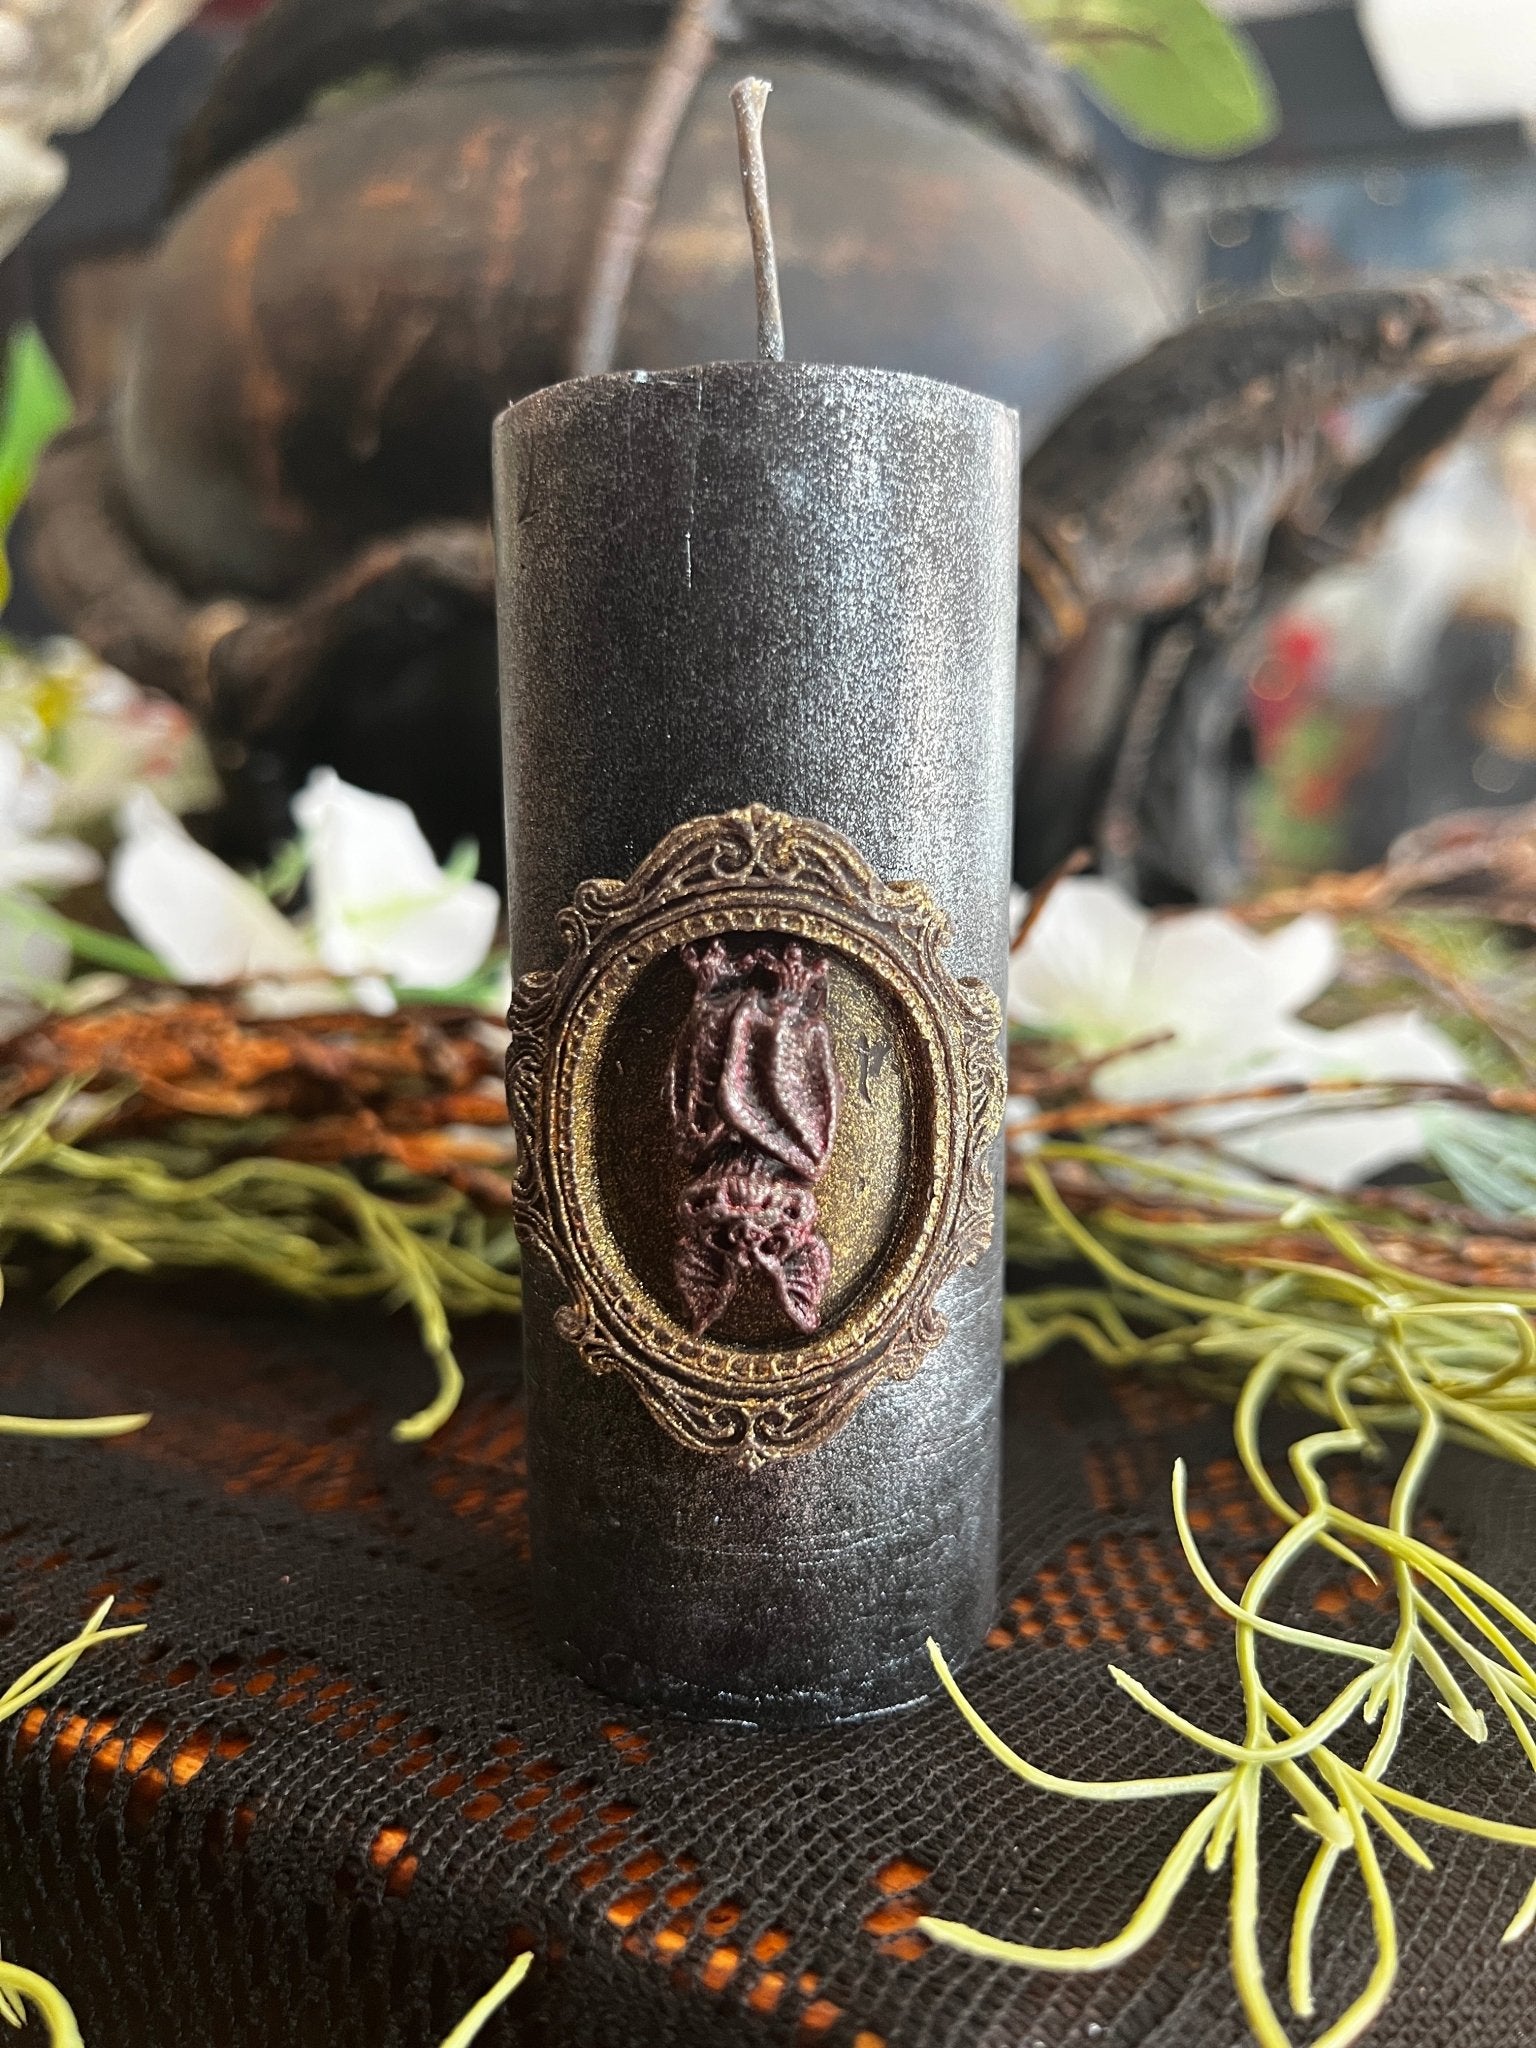 Victorian Bat Candle by Chthonic Star - Nocturne LLC